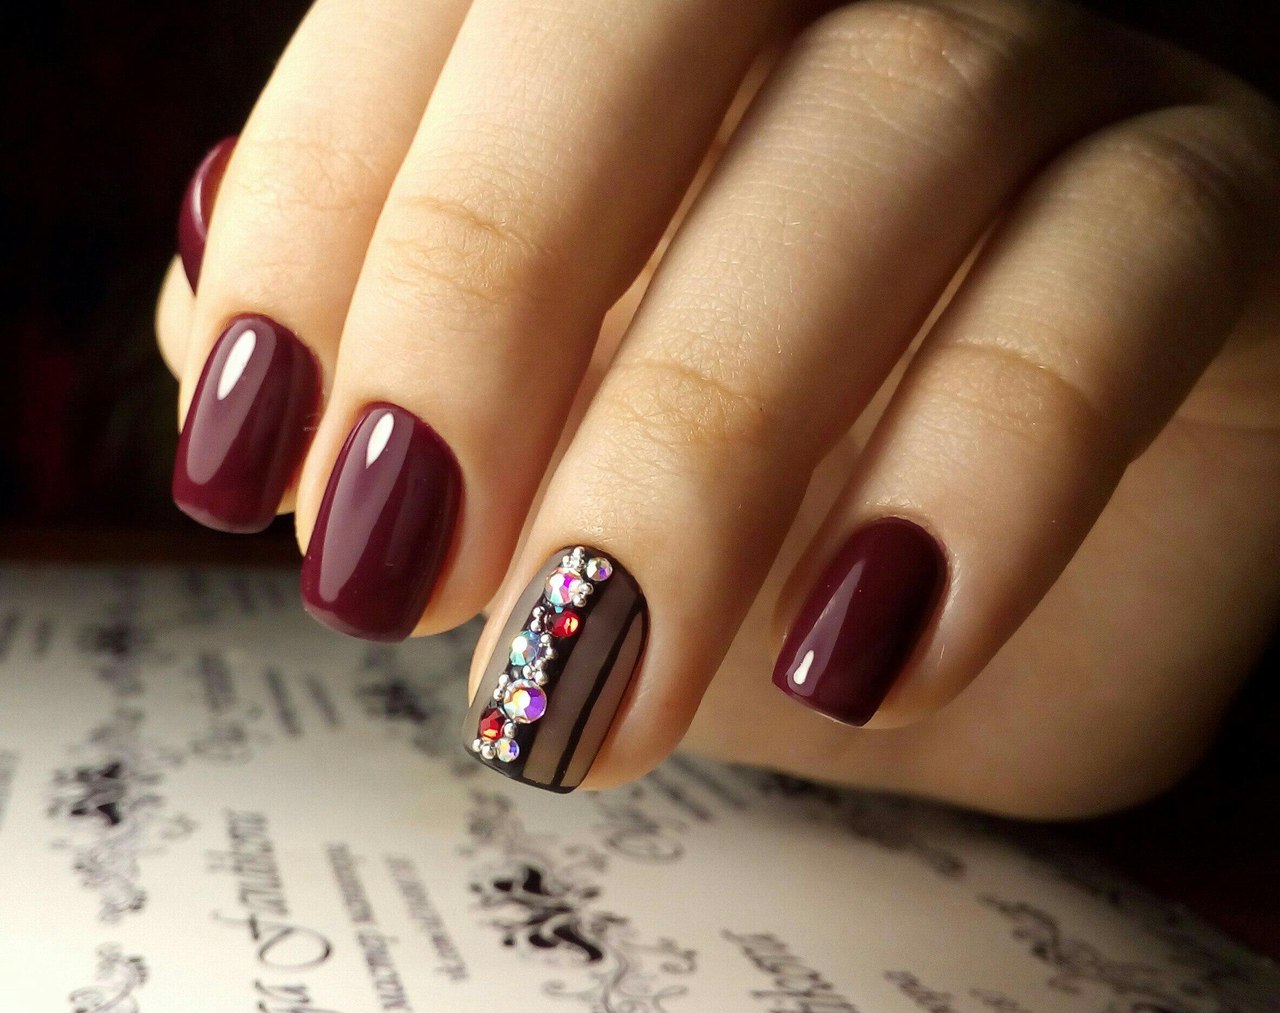 1. Nail Art Gallery - wide 7